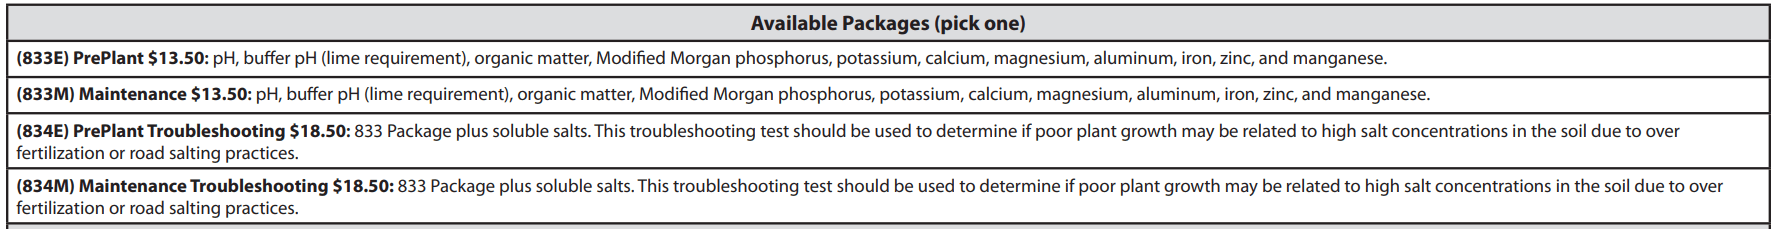 Soil test types are listed